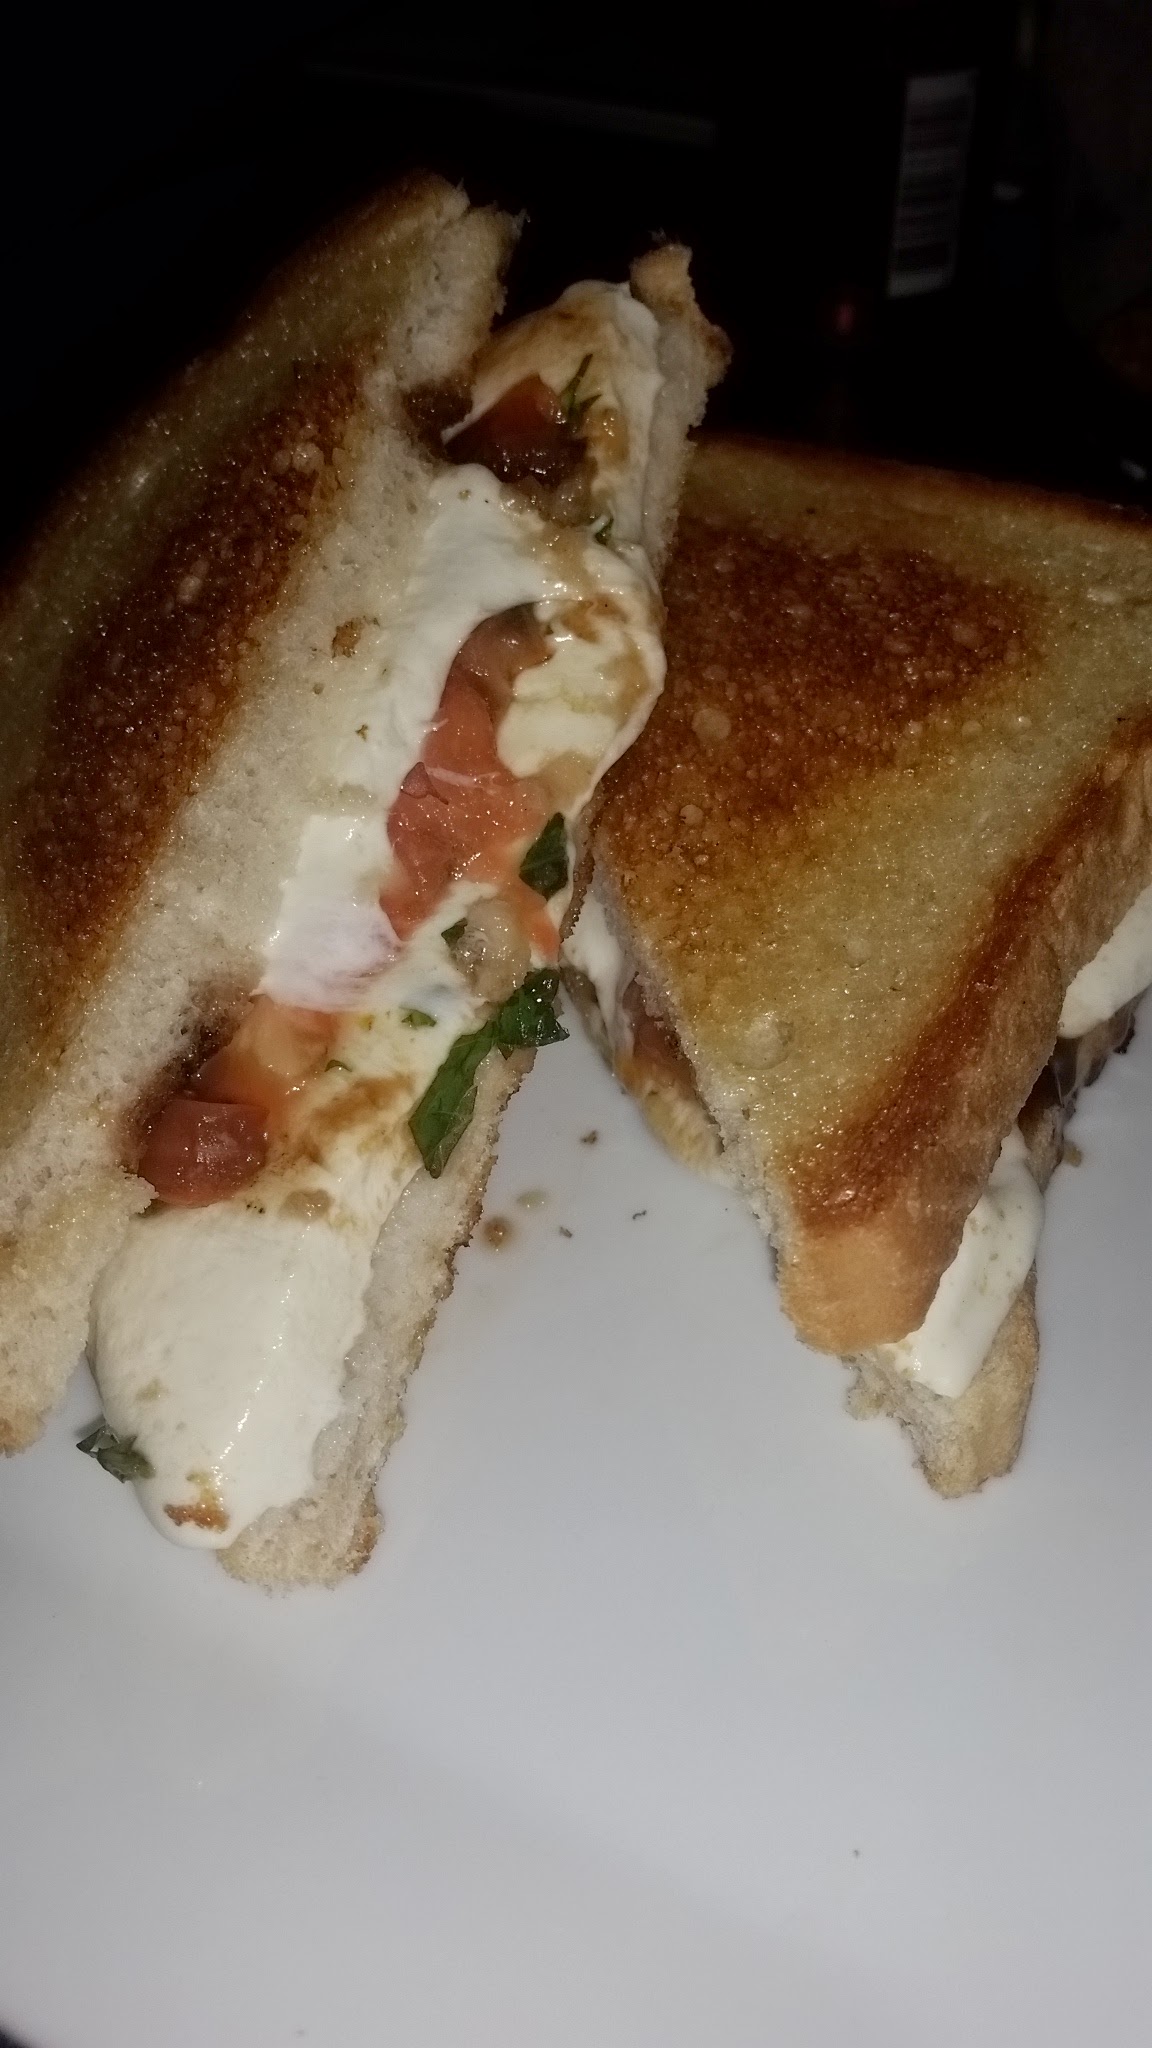 a grilled sandwich on a plate